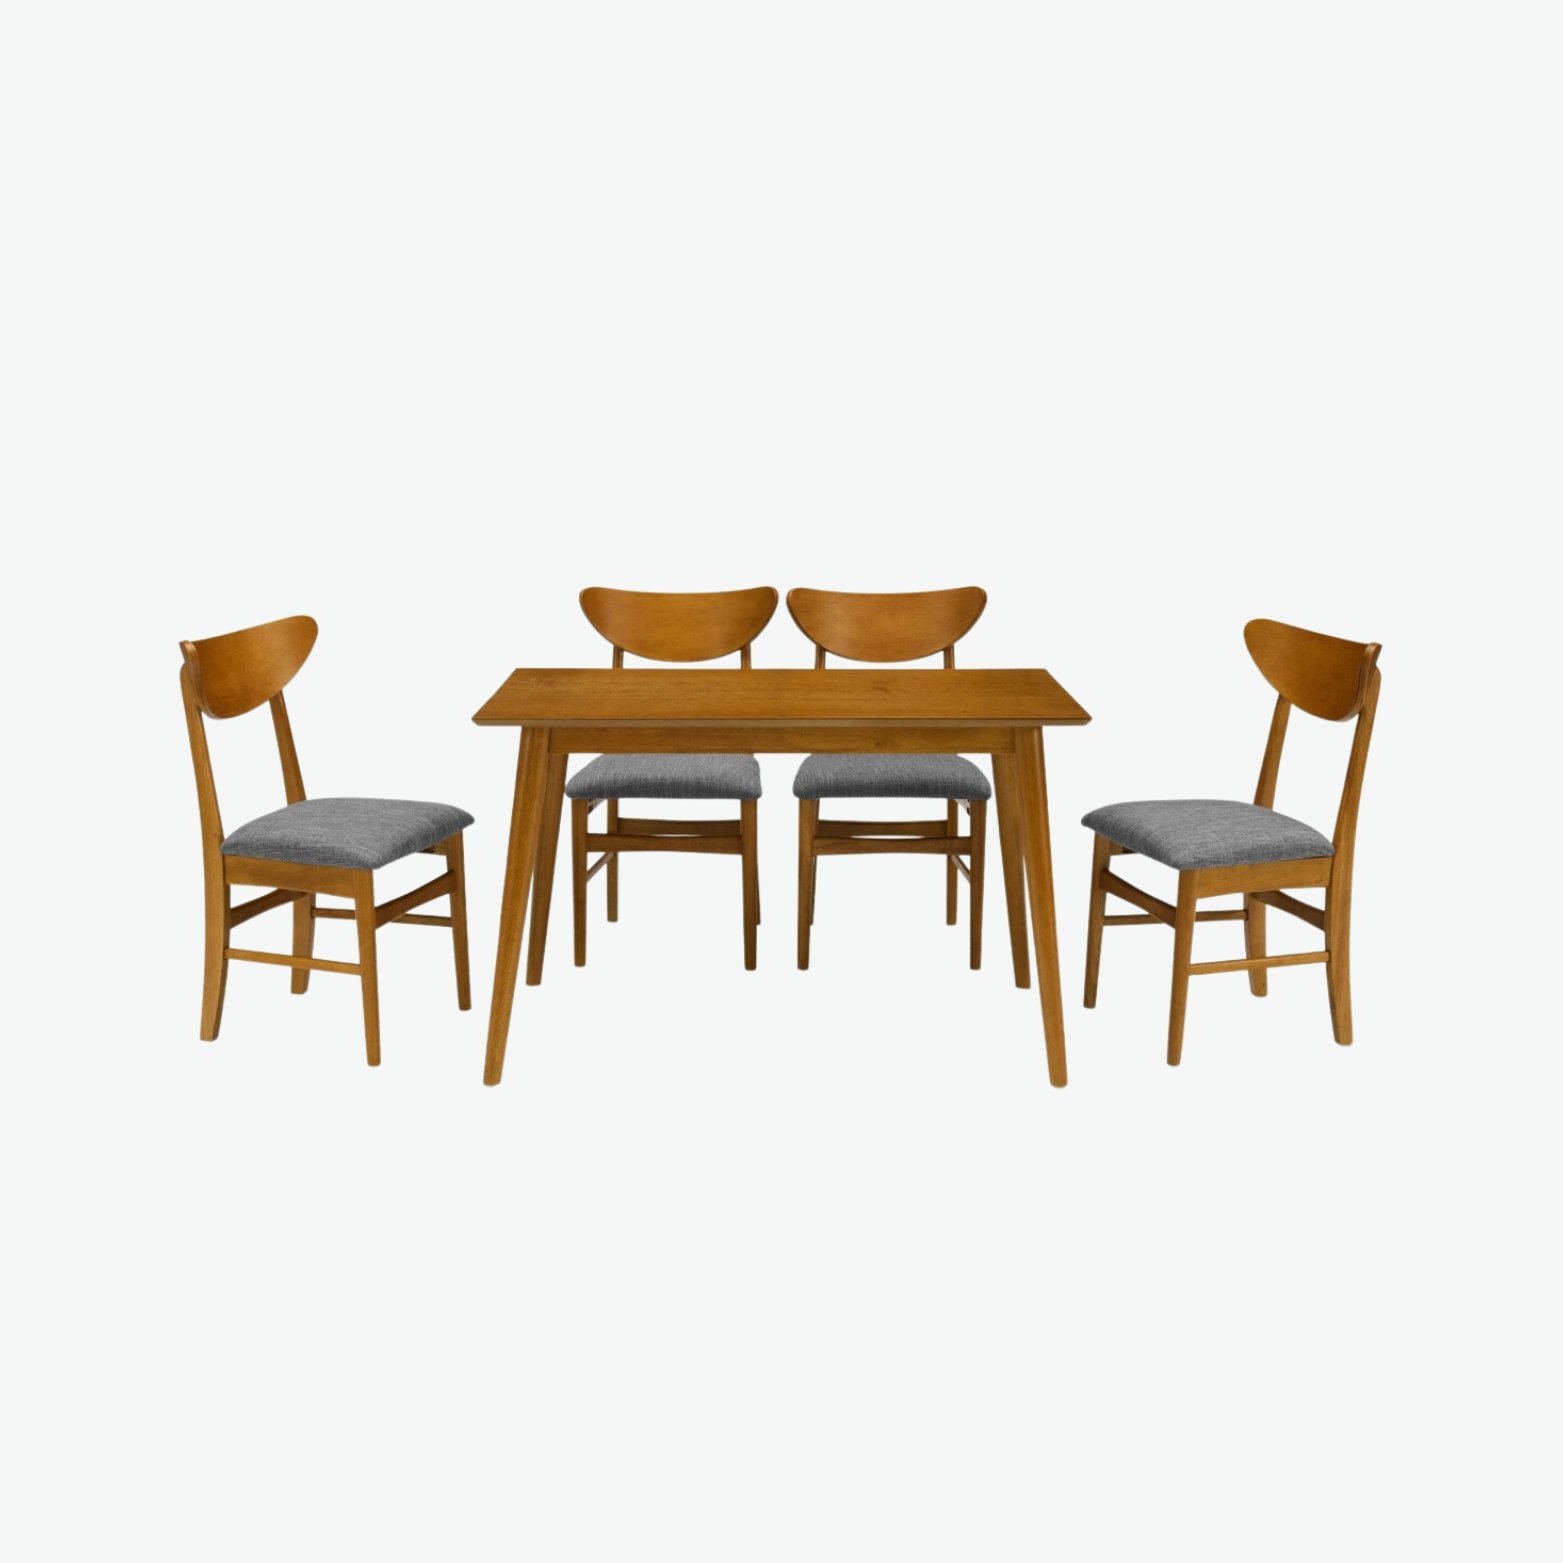 Mid-Modern Wood Table, Chairs with Grey Padded Seat.jpg